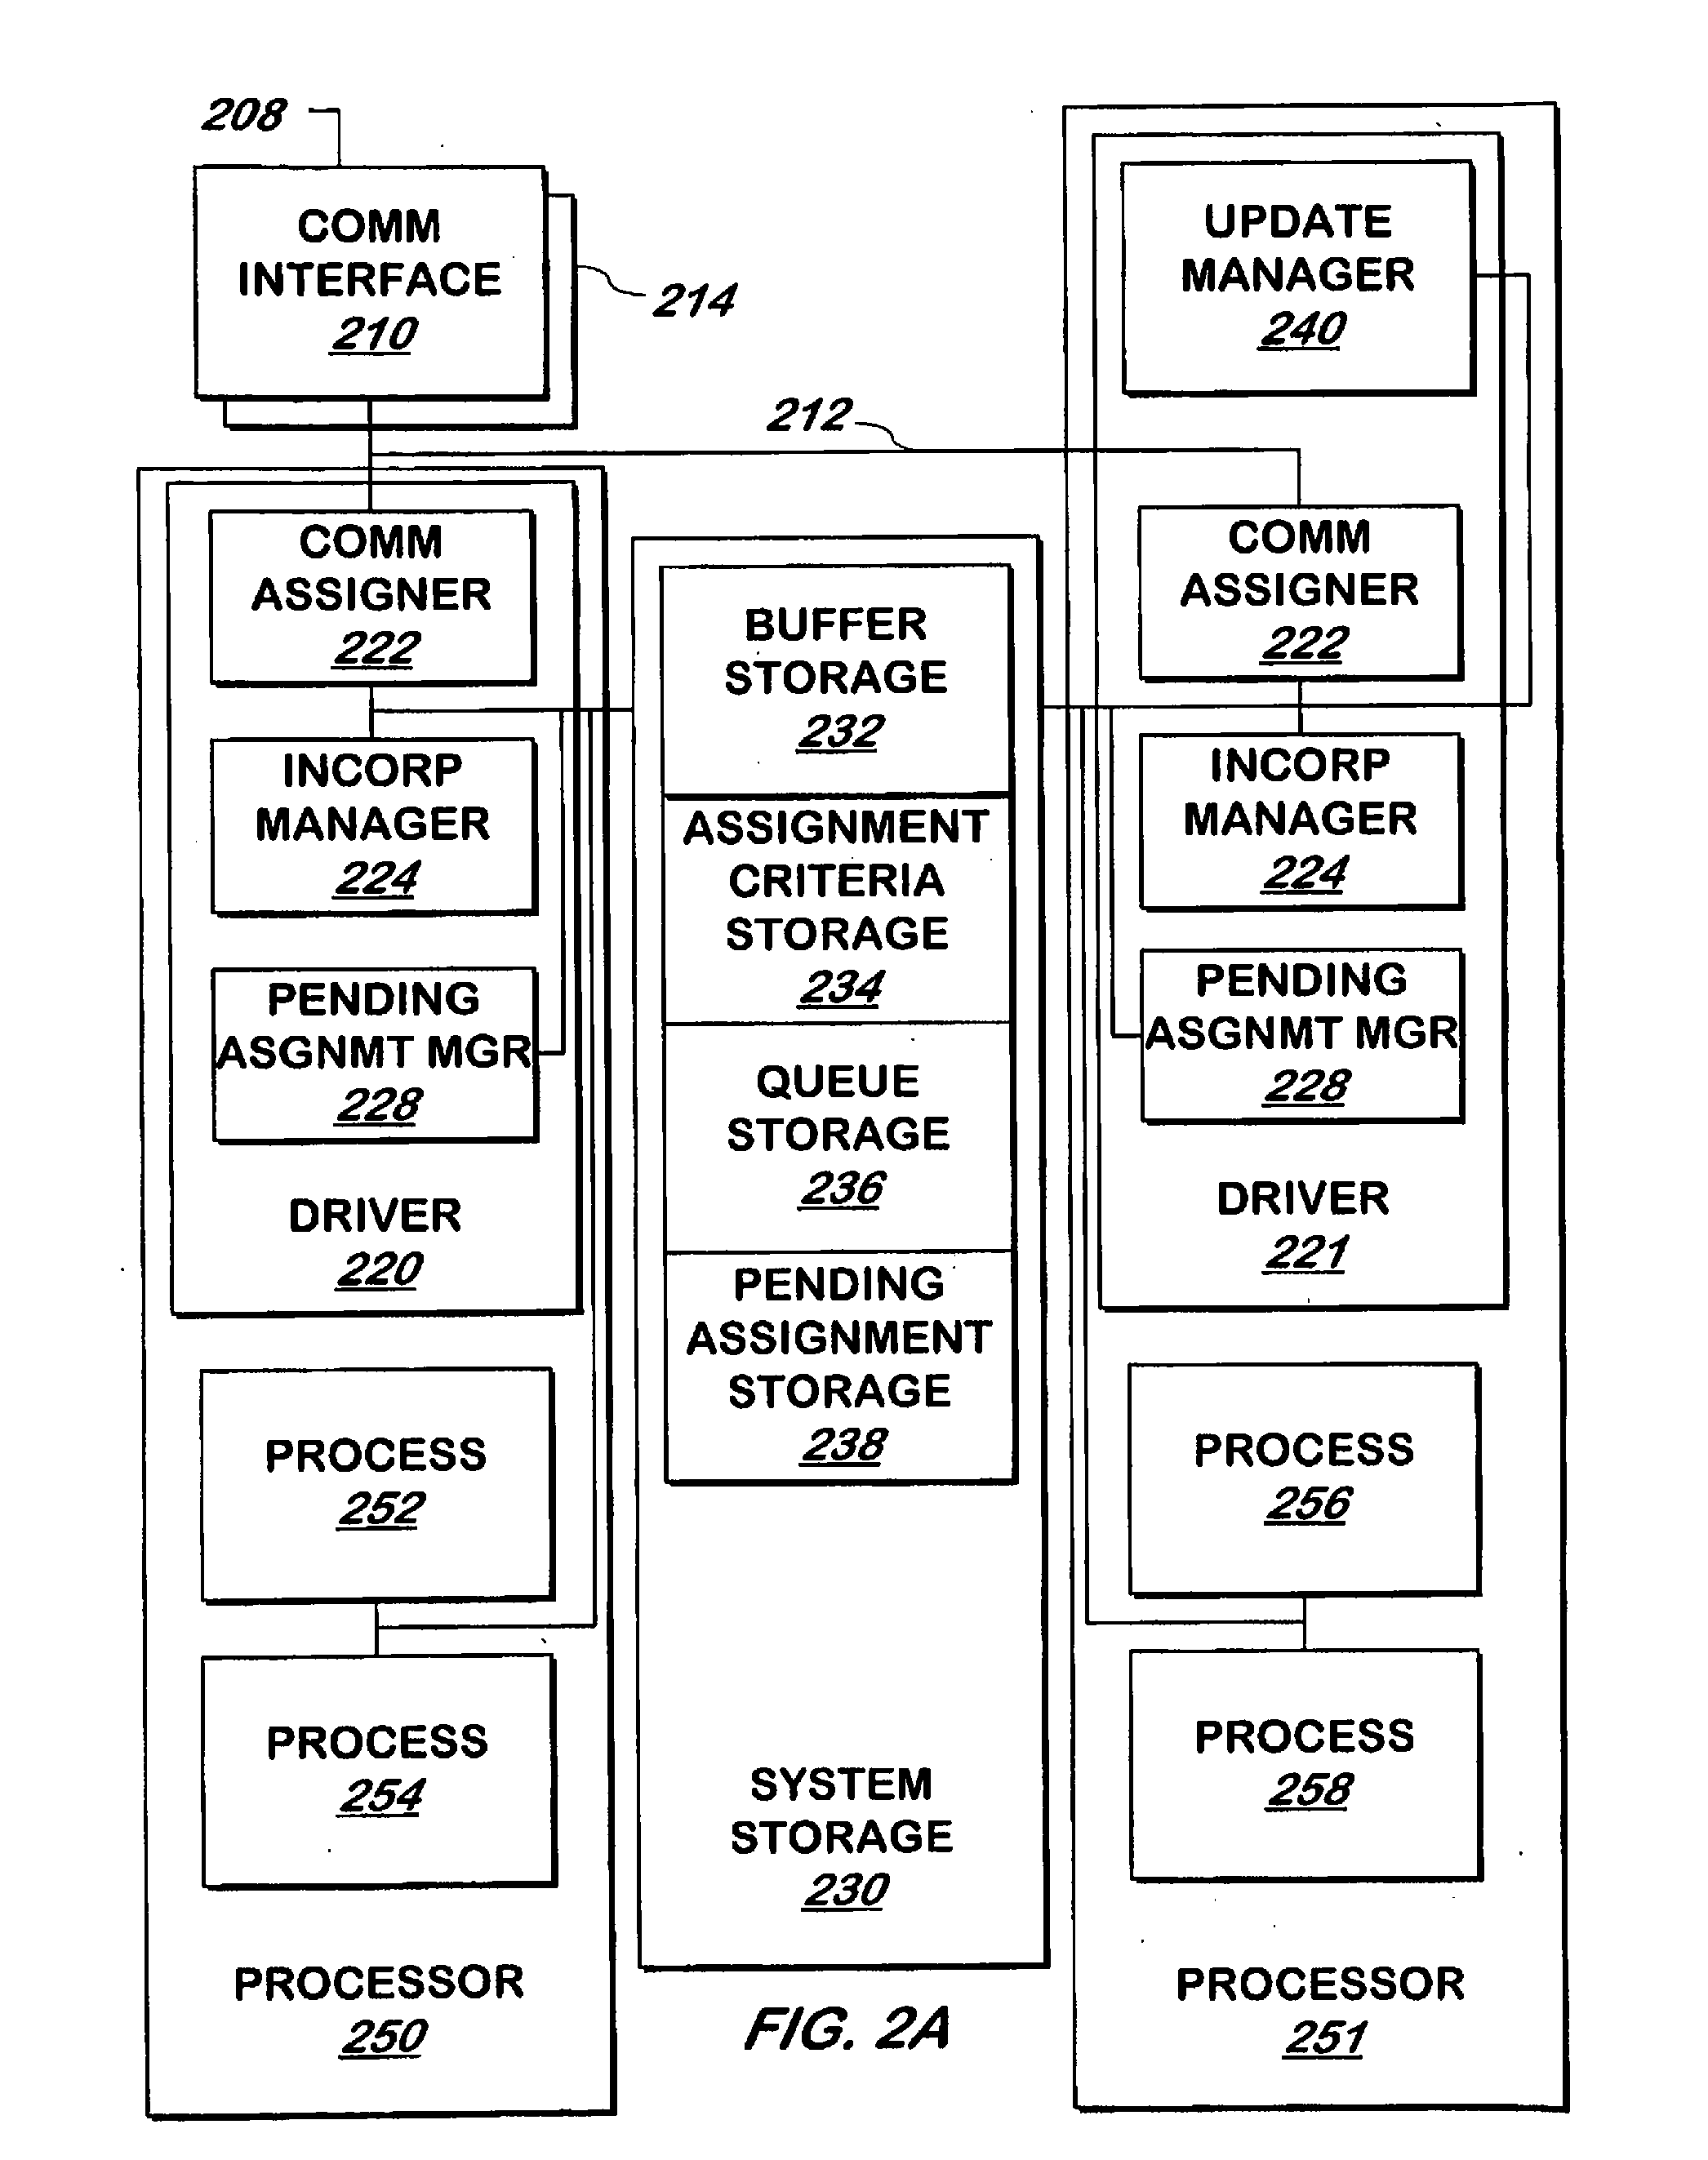 System and method for allocating communications to processors and rescheduling processes in a multiprocessor system